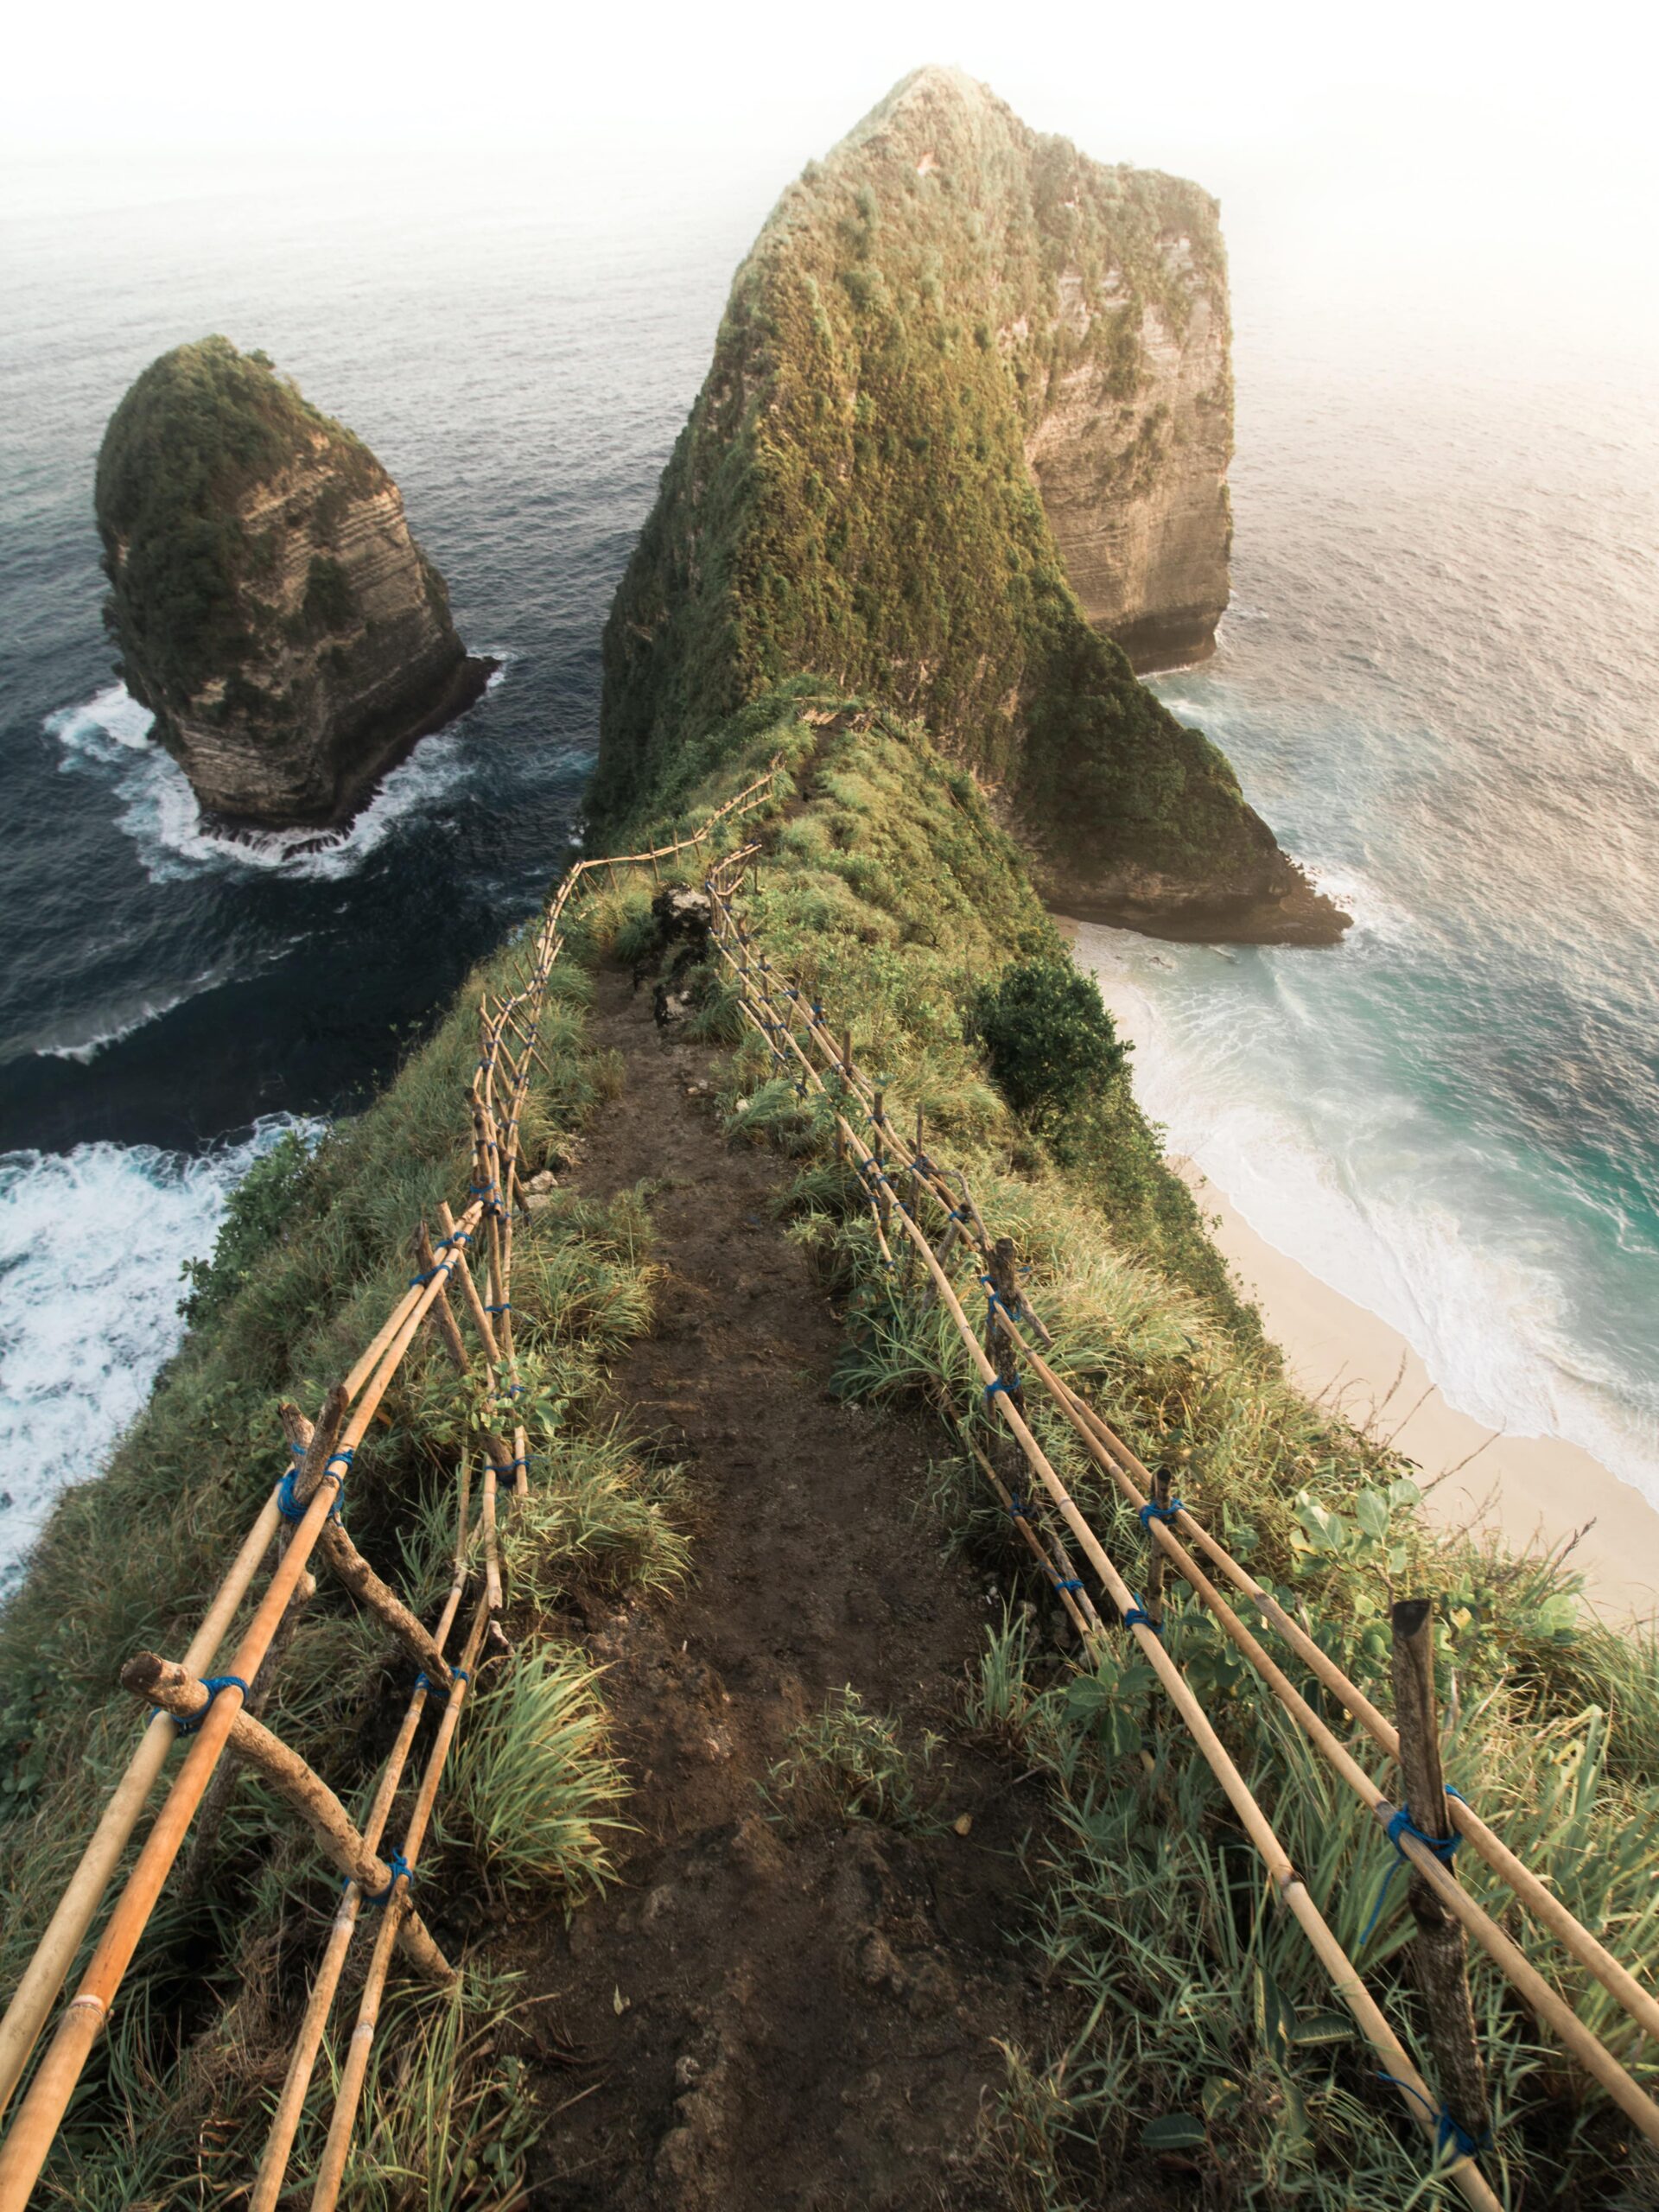 Nusa Penida One Day Tour: A Solution For Travelers With A Limited Holiday Time